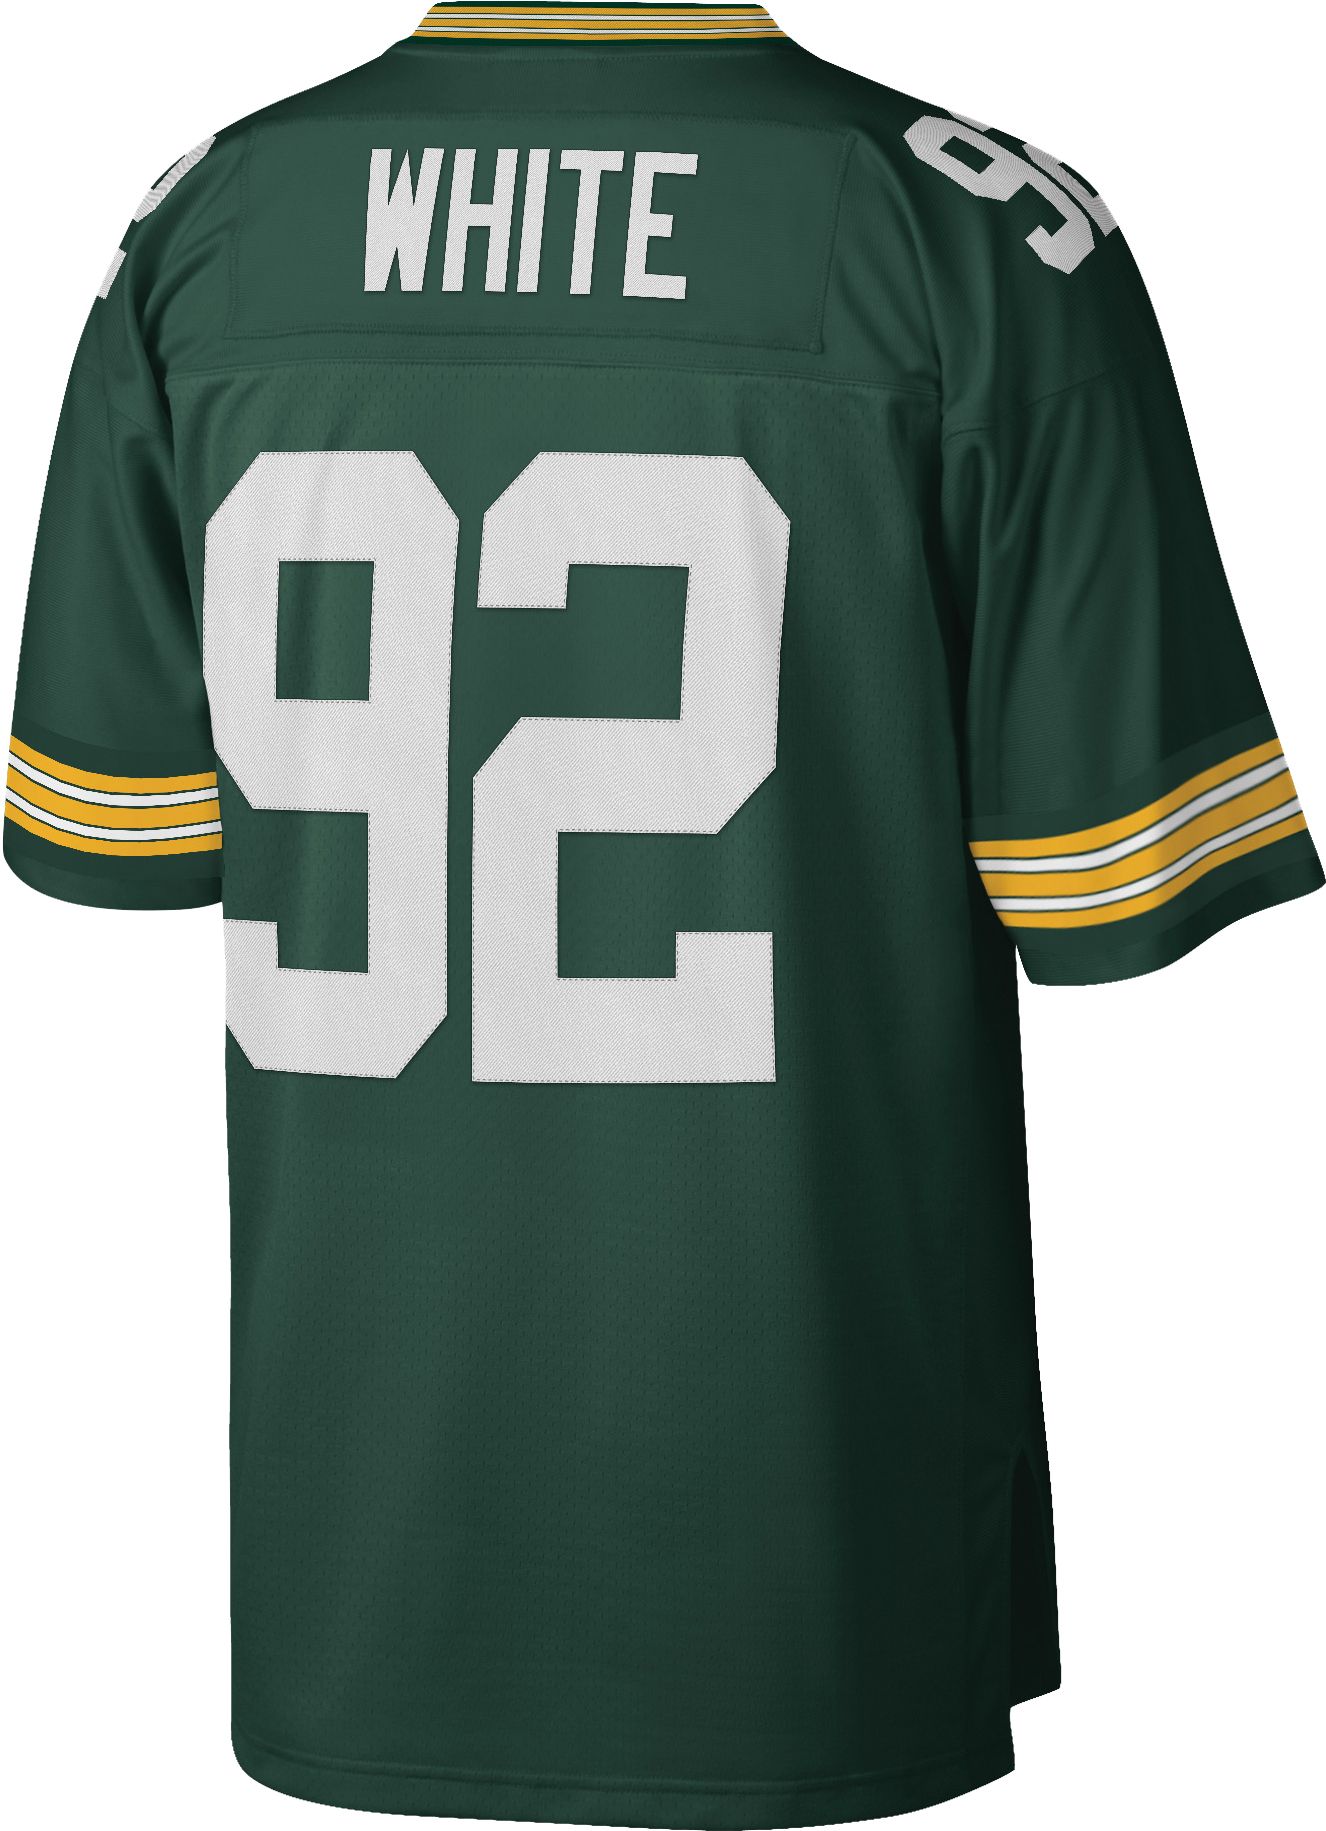 packers throwback jersey